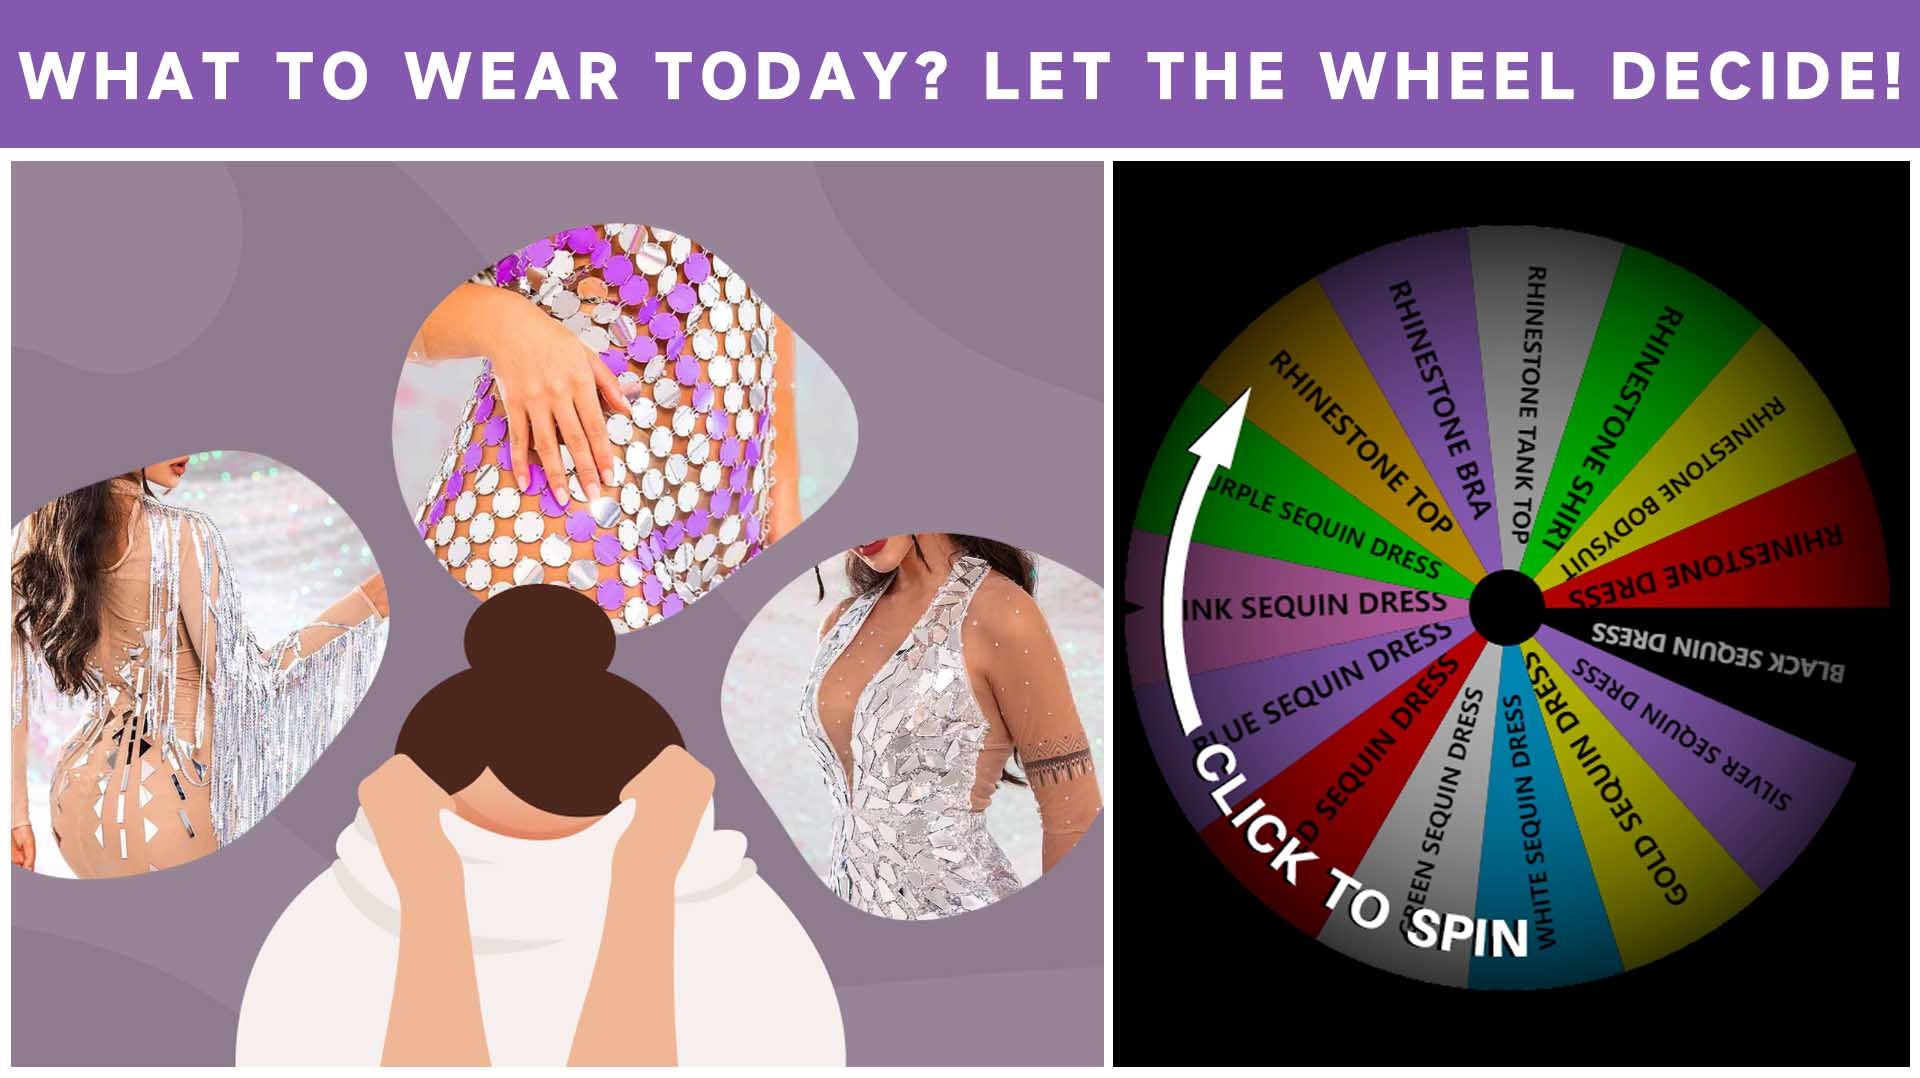 WHAT TO WEAR TODAY LET THE WHEEL DECIDE!